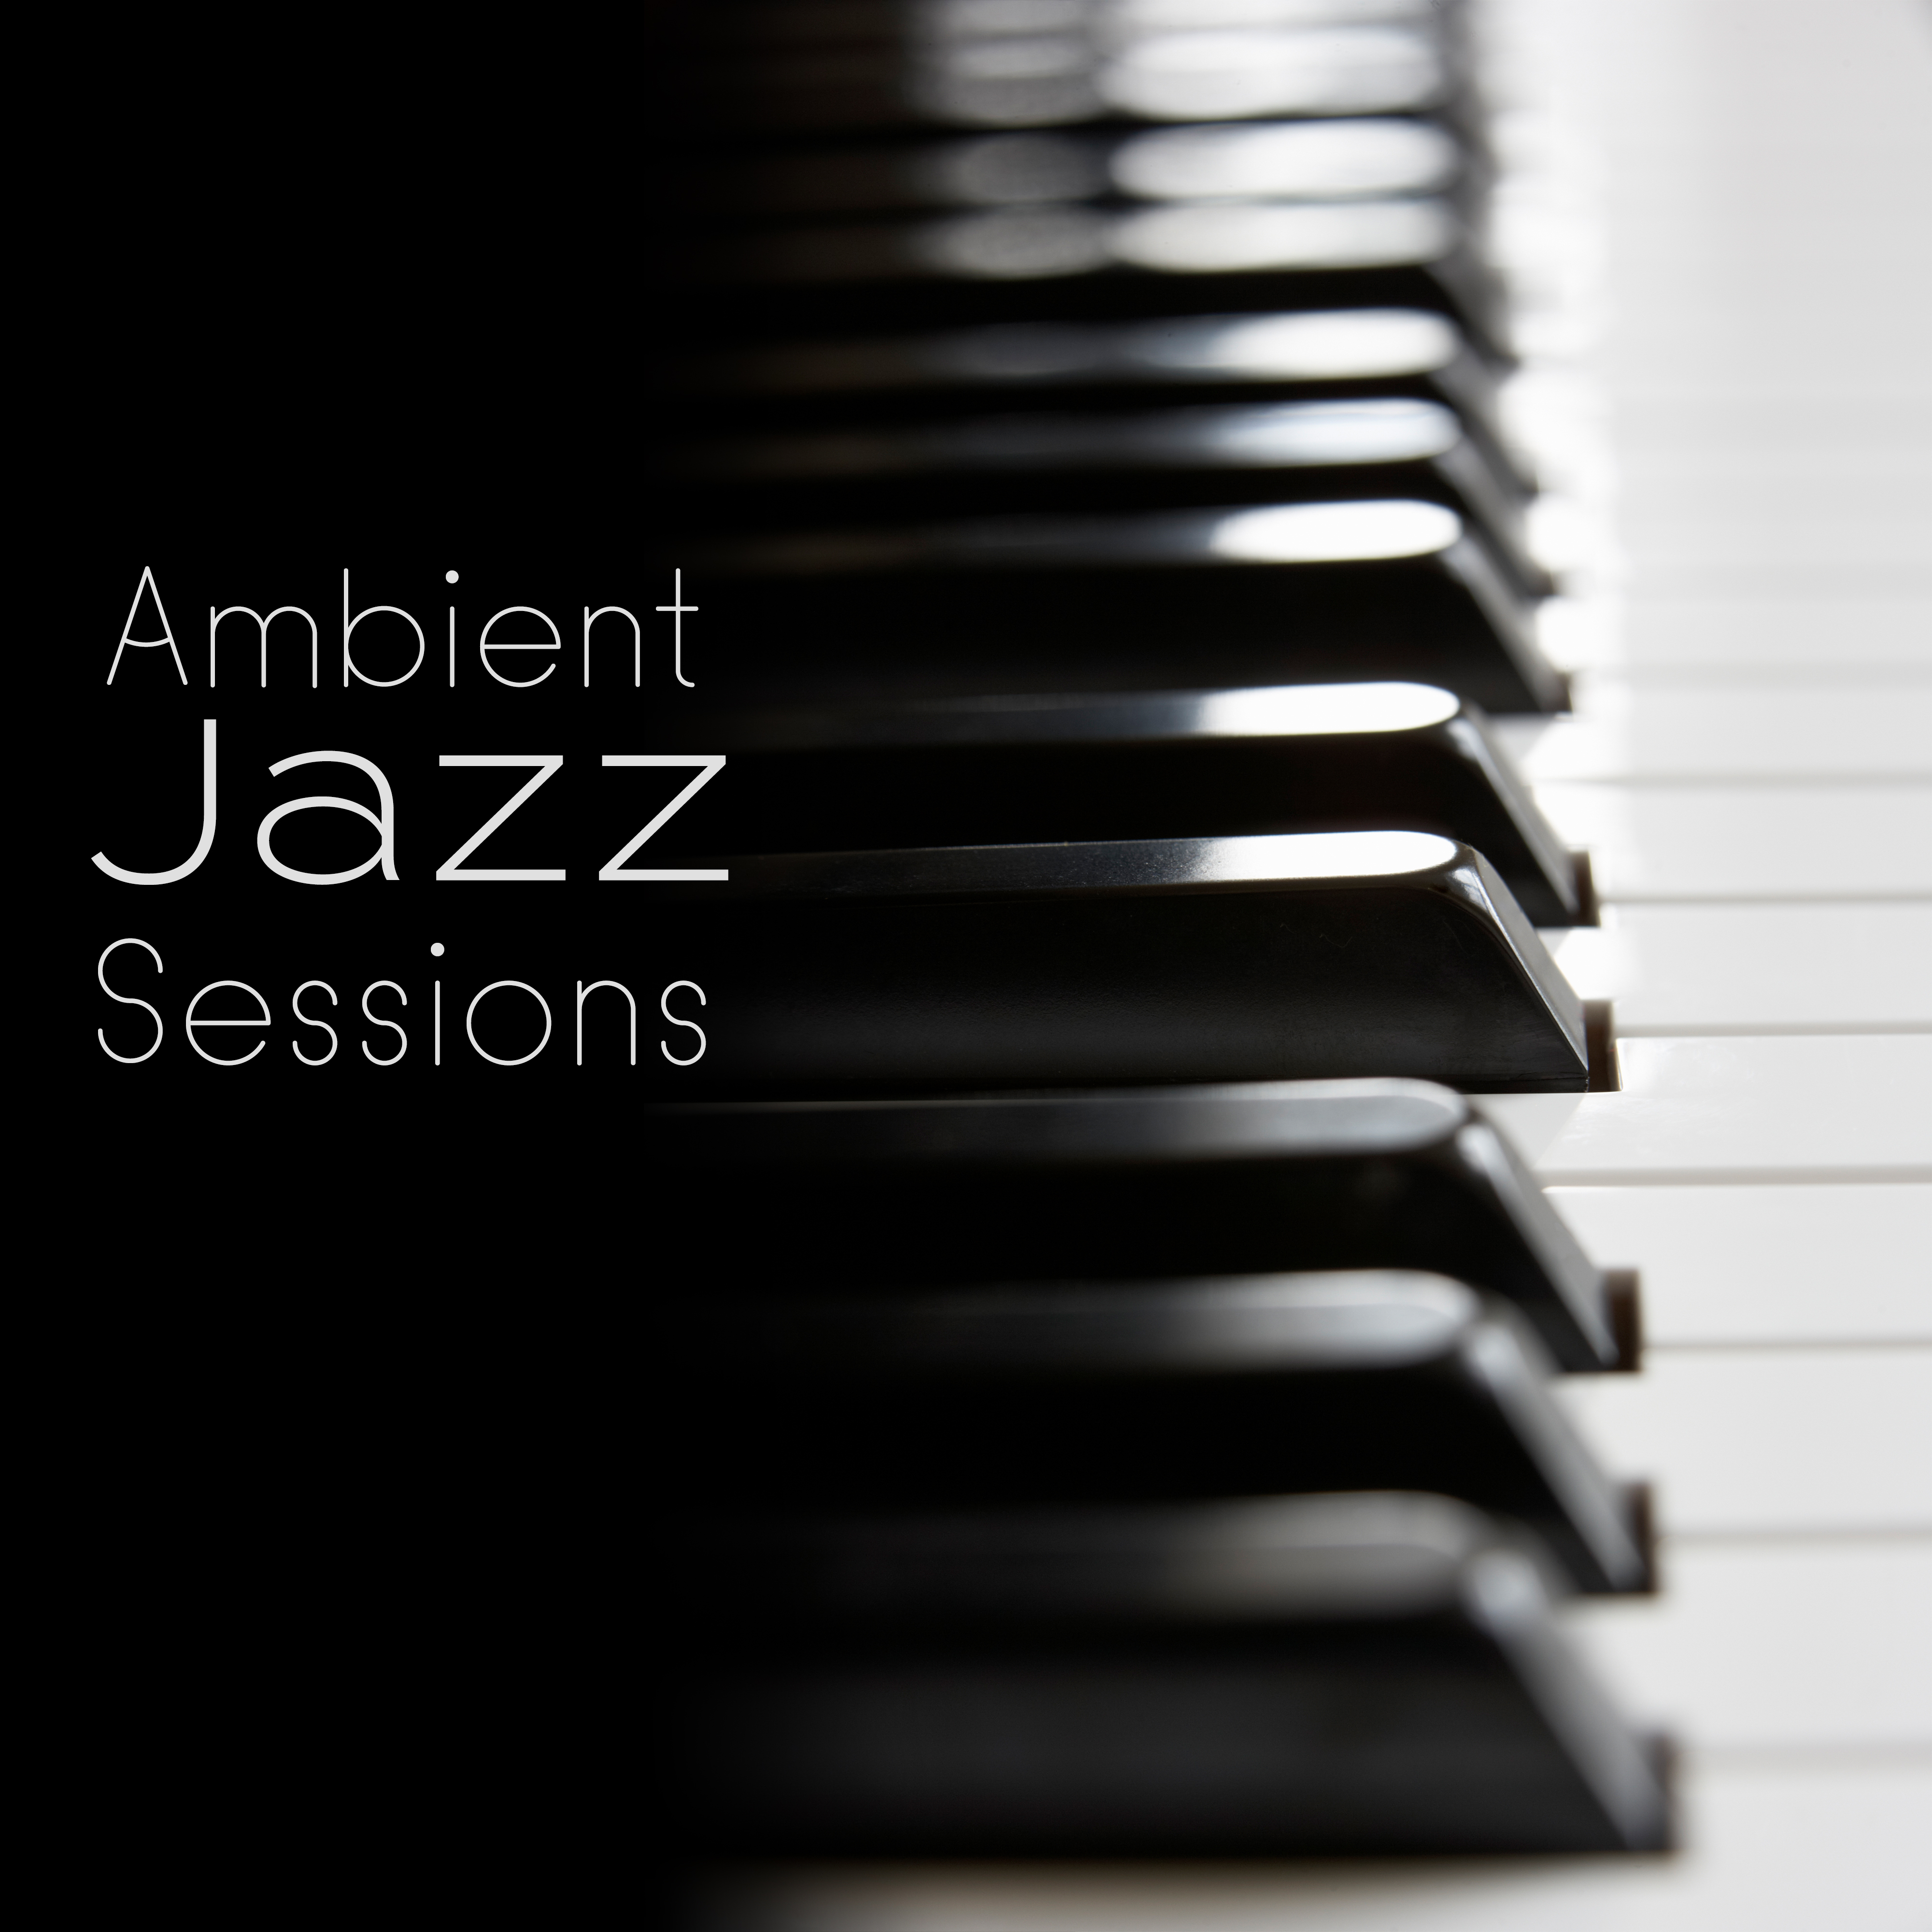 Ambient Jazz Sessions